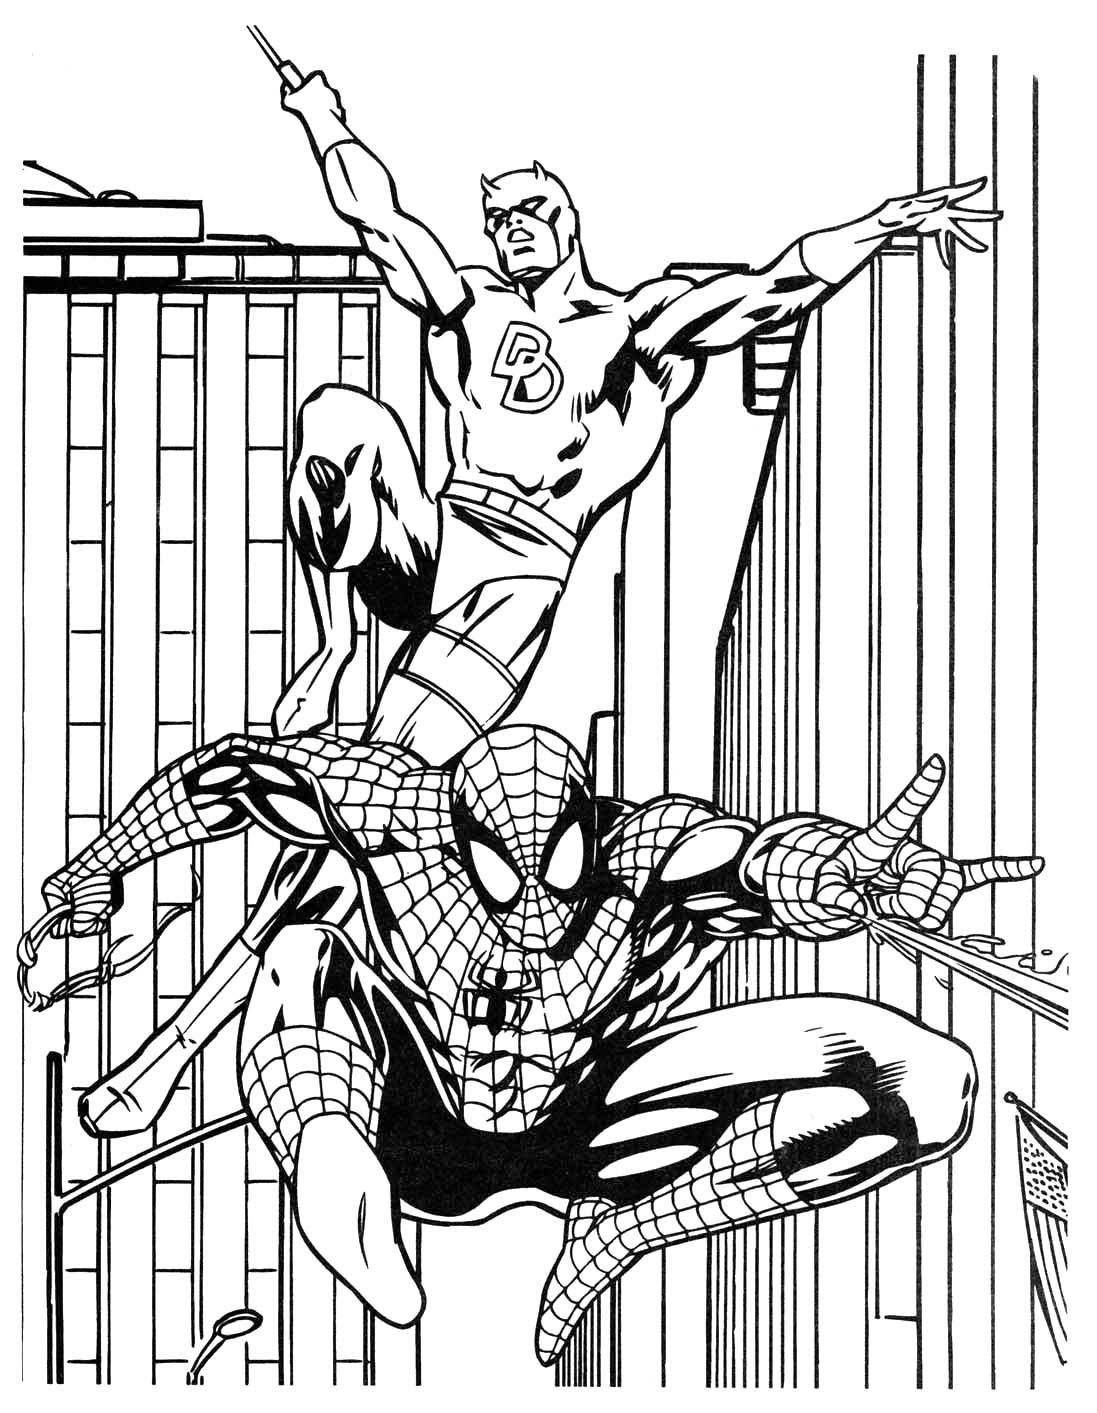 Marvelous Image of Free Spiderman Coloring Pages - davemelillo.com   Superhero coloring pages, Spiderman coloring, Avengers coloring pages